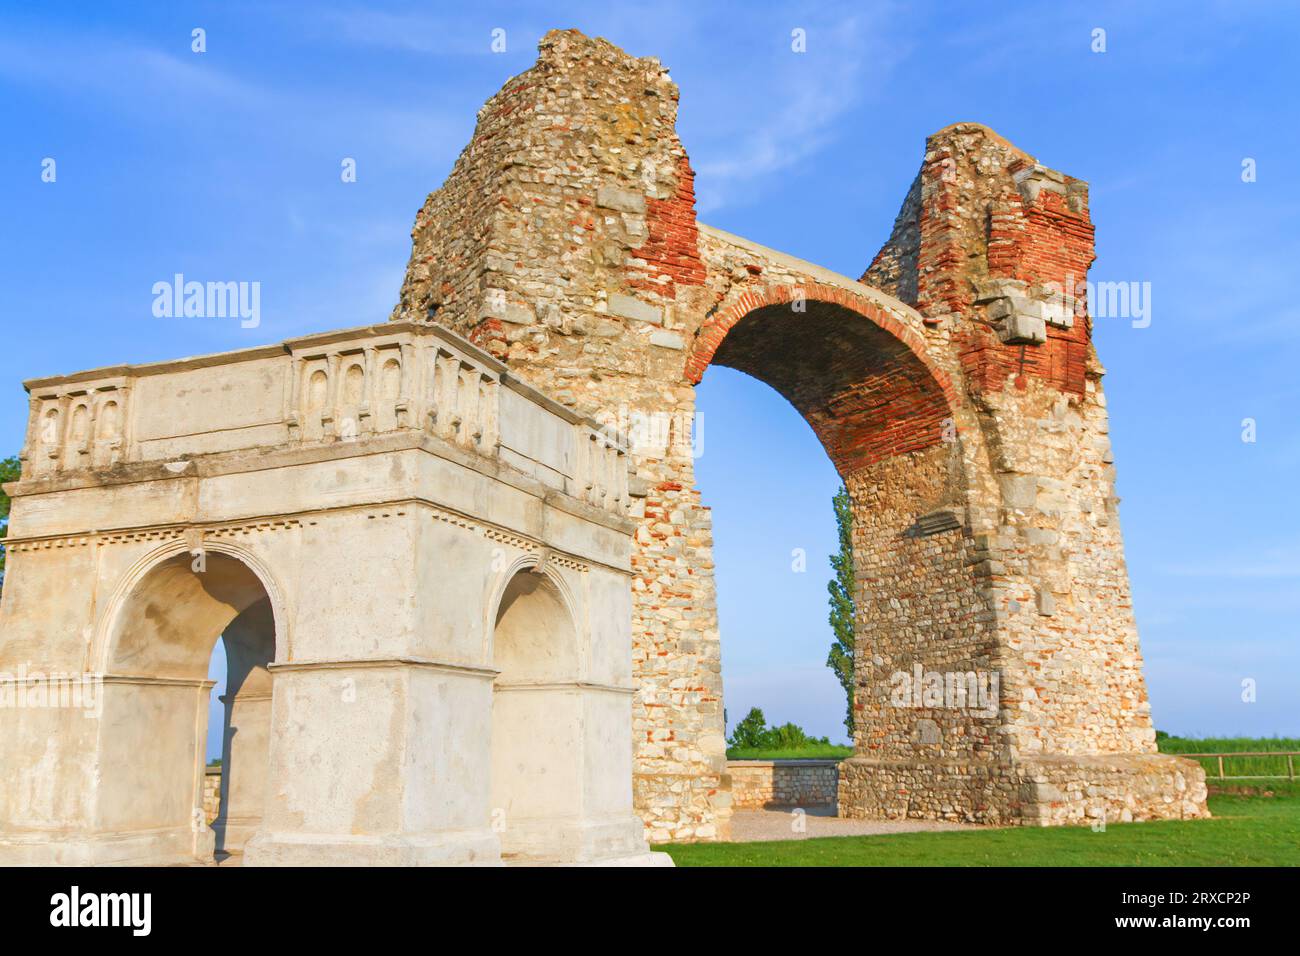 Old Roman City Gate (Heidentor) at Carnuntum in Austria, Europe. The model of the original building is in the foreground. Horizontally. Stock Photo